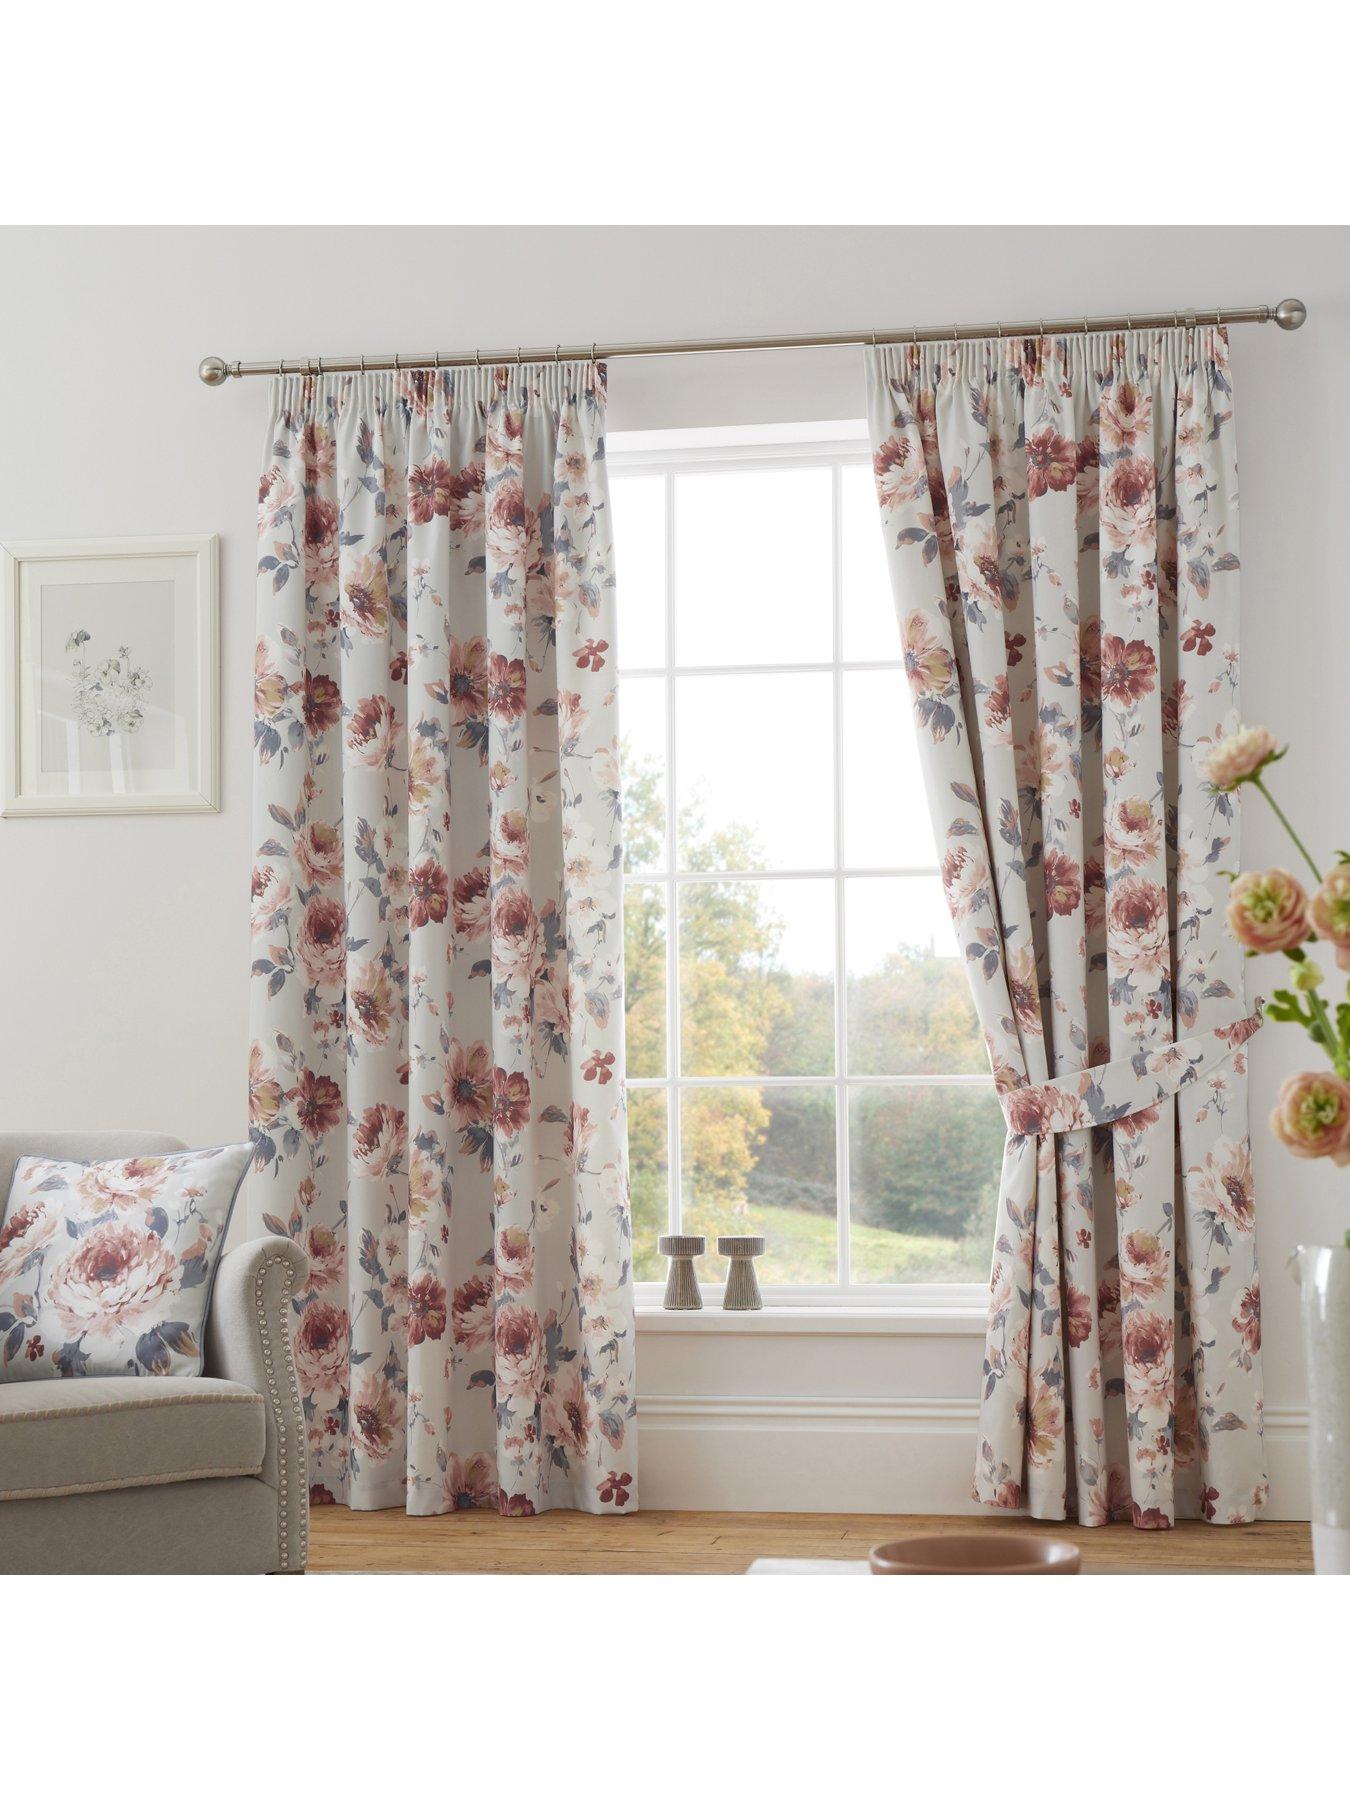 Cream lined  curtains,with flower outlines in toning shades  62" x 54" 